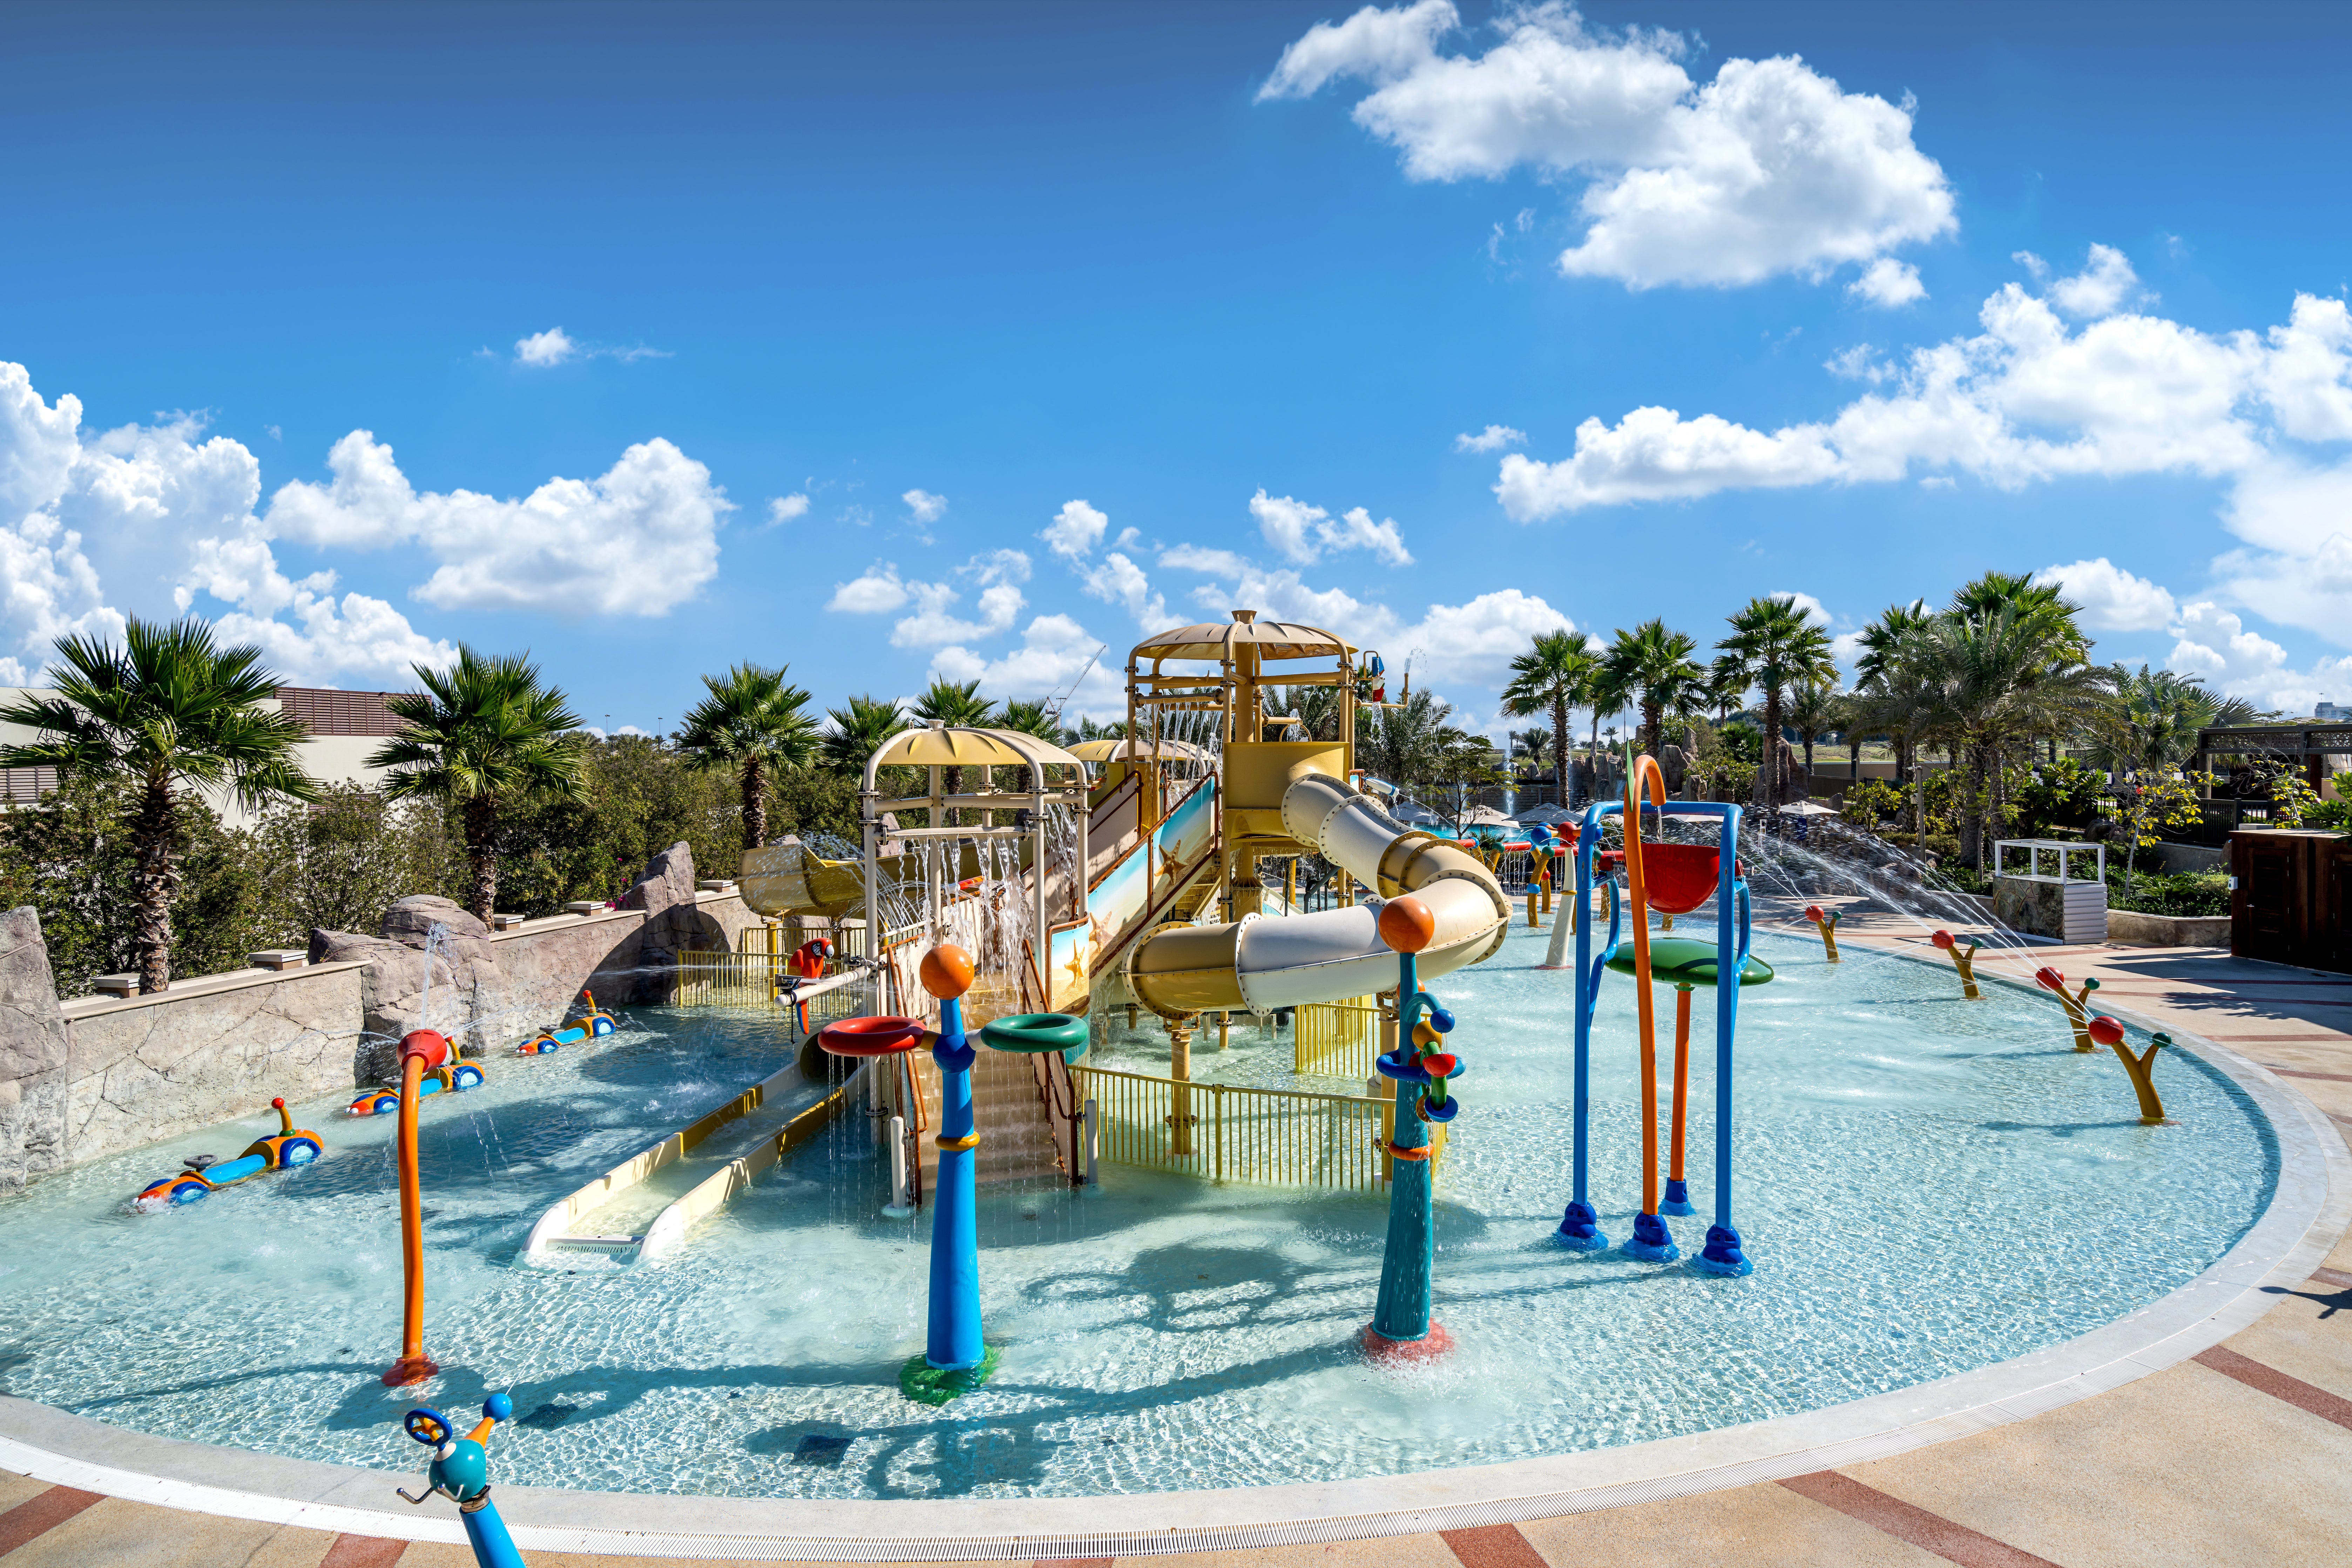 The on-site waterpark will keep the kids entertained for hours